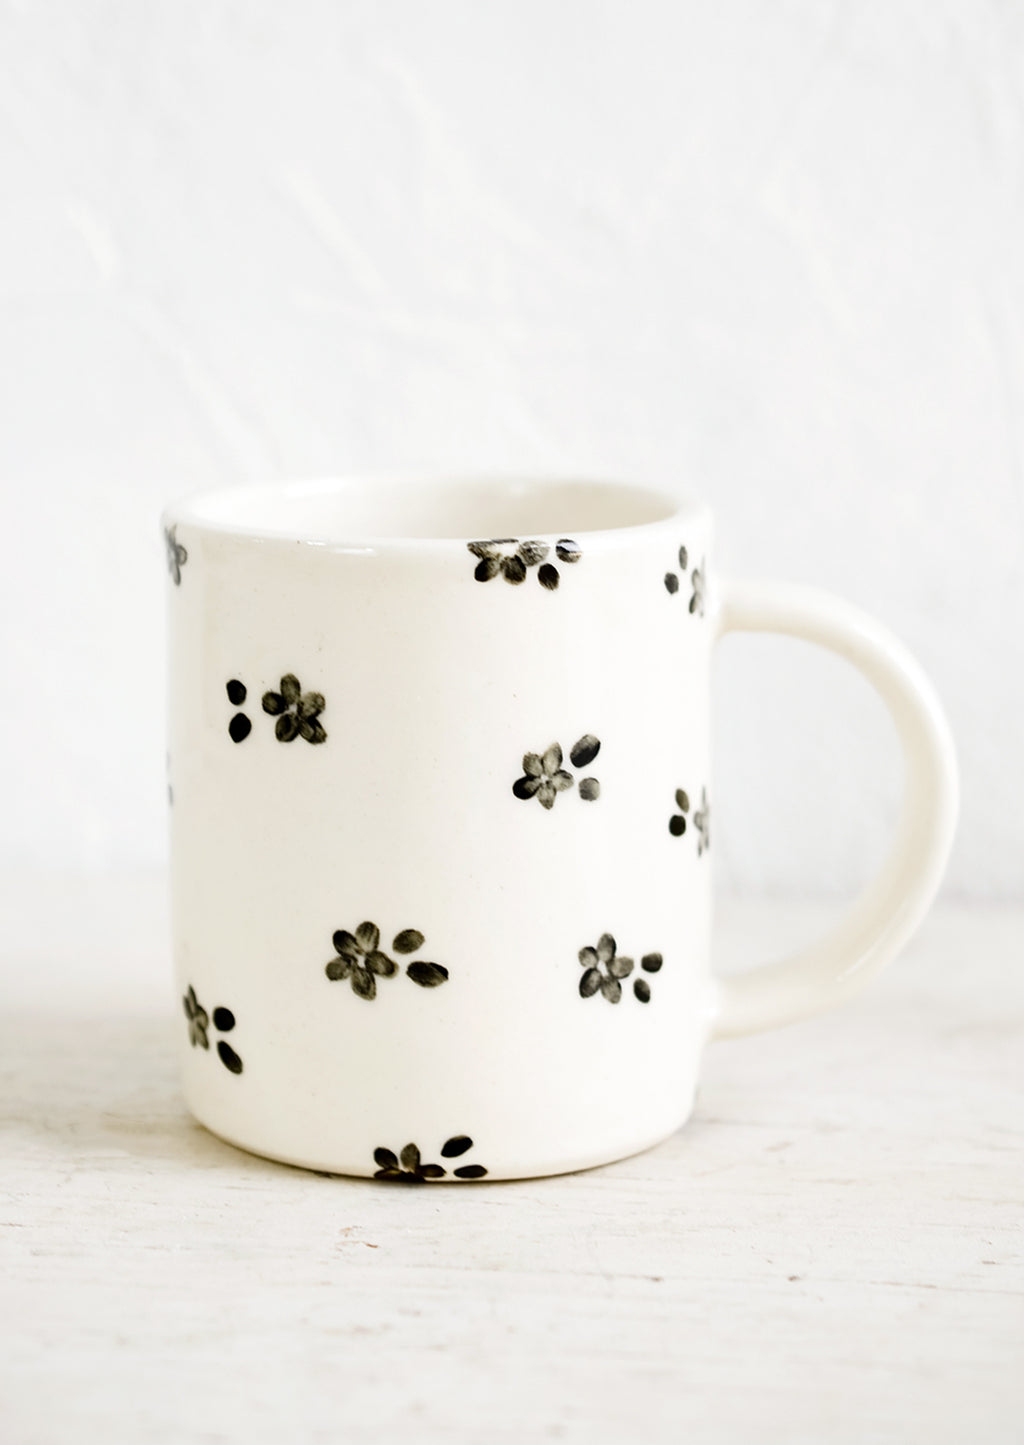 Black & White Floral: A handmade ceramic mug with white background and hand-painted black floral print.